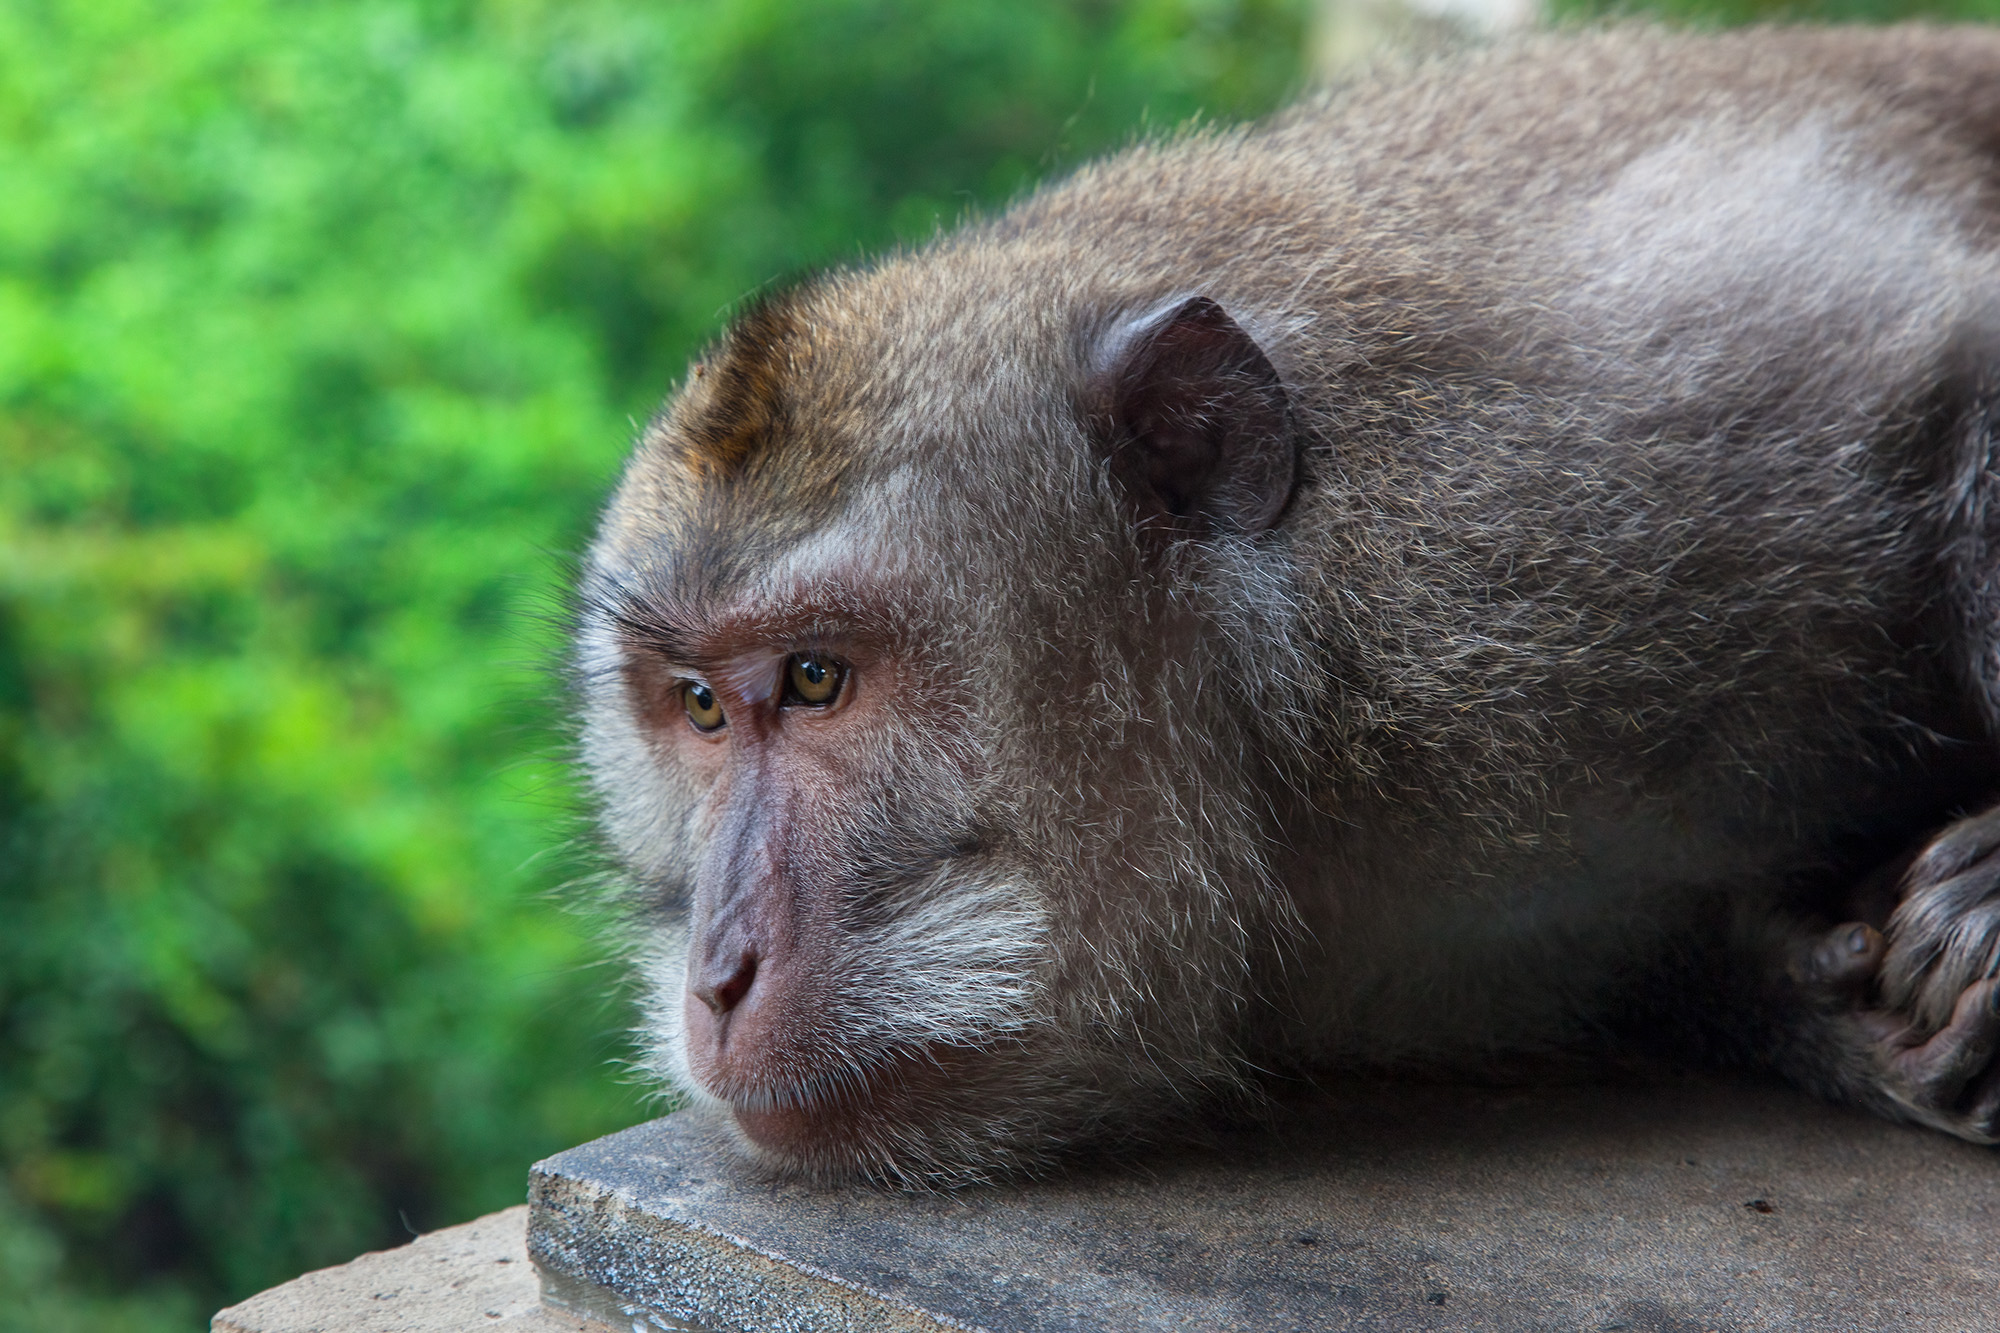 Amidst Bali's lush Ubud Monkey Forest, this image captures a vigilant monkey at rest. With a sharp focus on its fur and face...